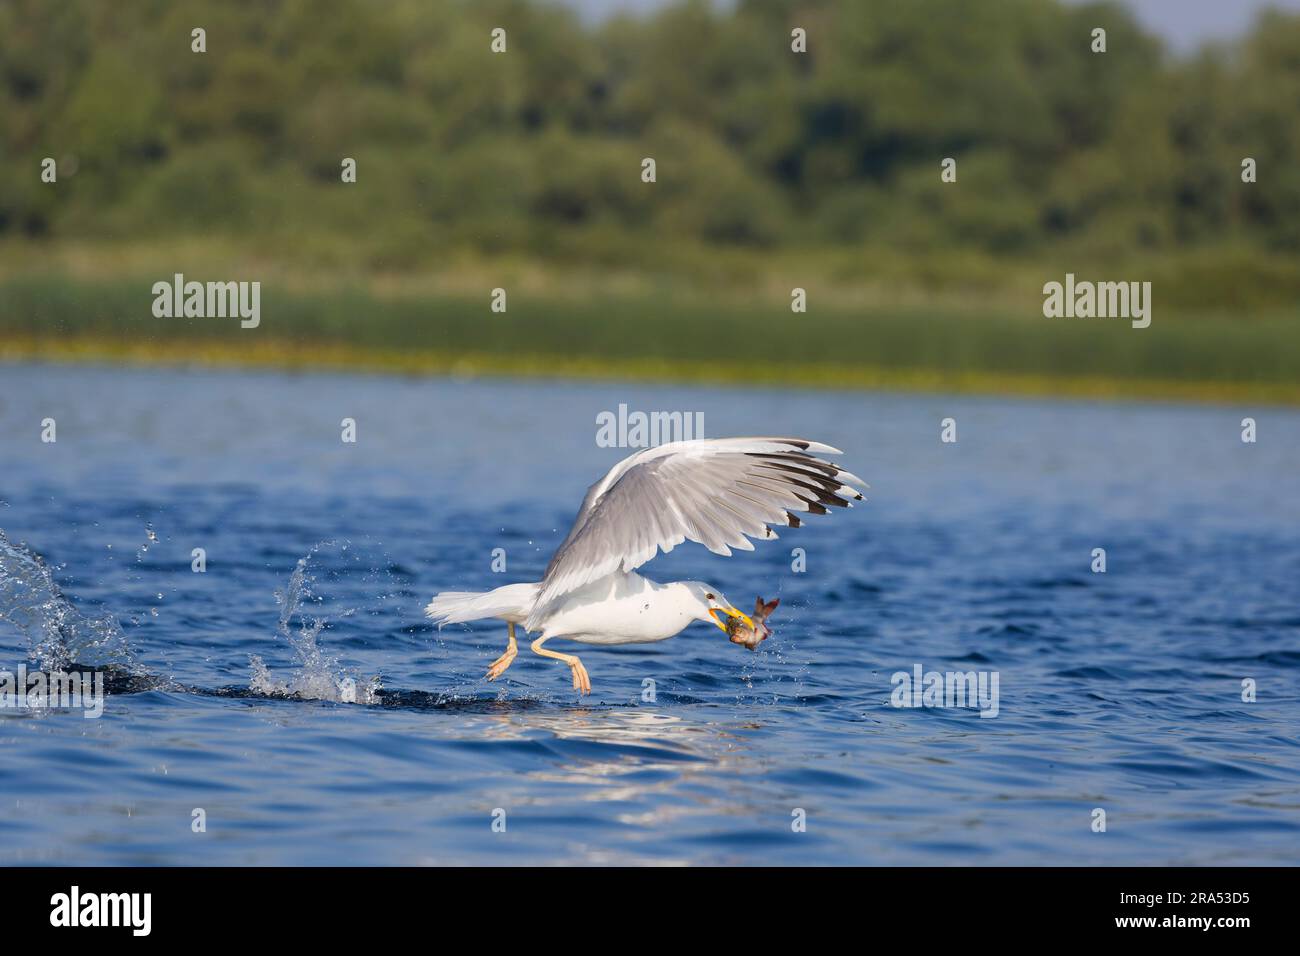 Caspian gull Larus cachinnans, adult taking off from water with fish in beak, Danube Delta, Romania, June Stock Photo